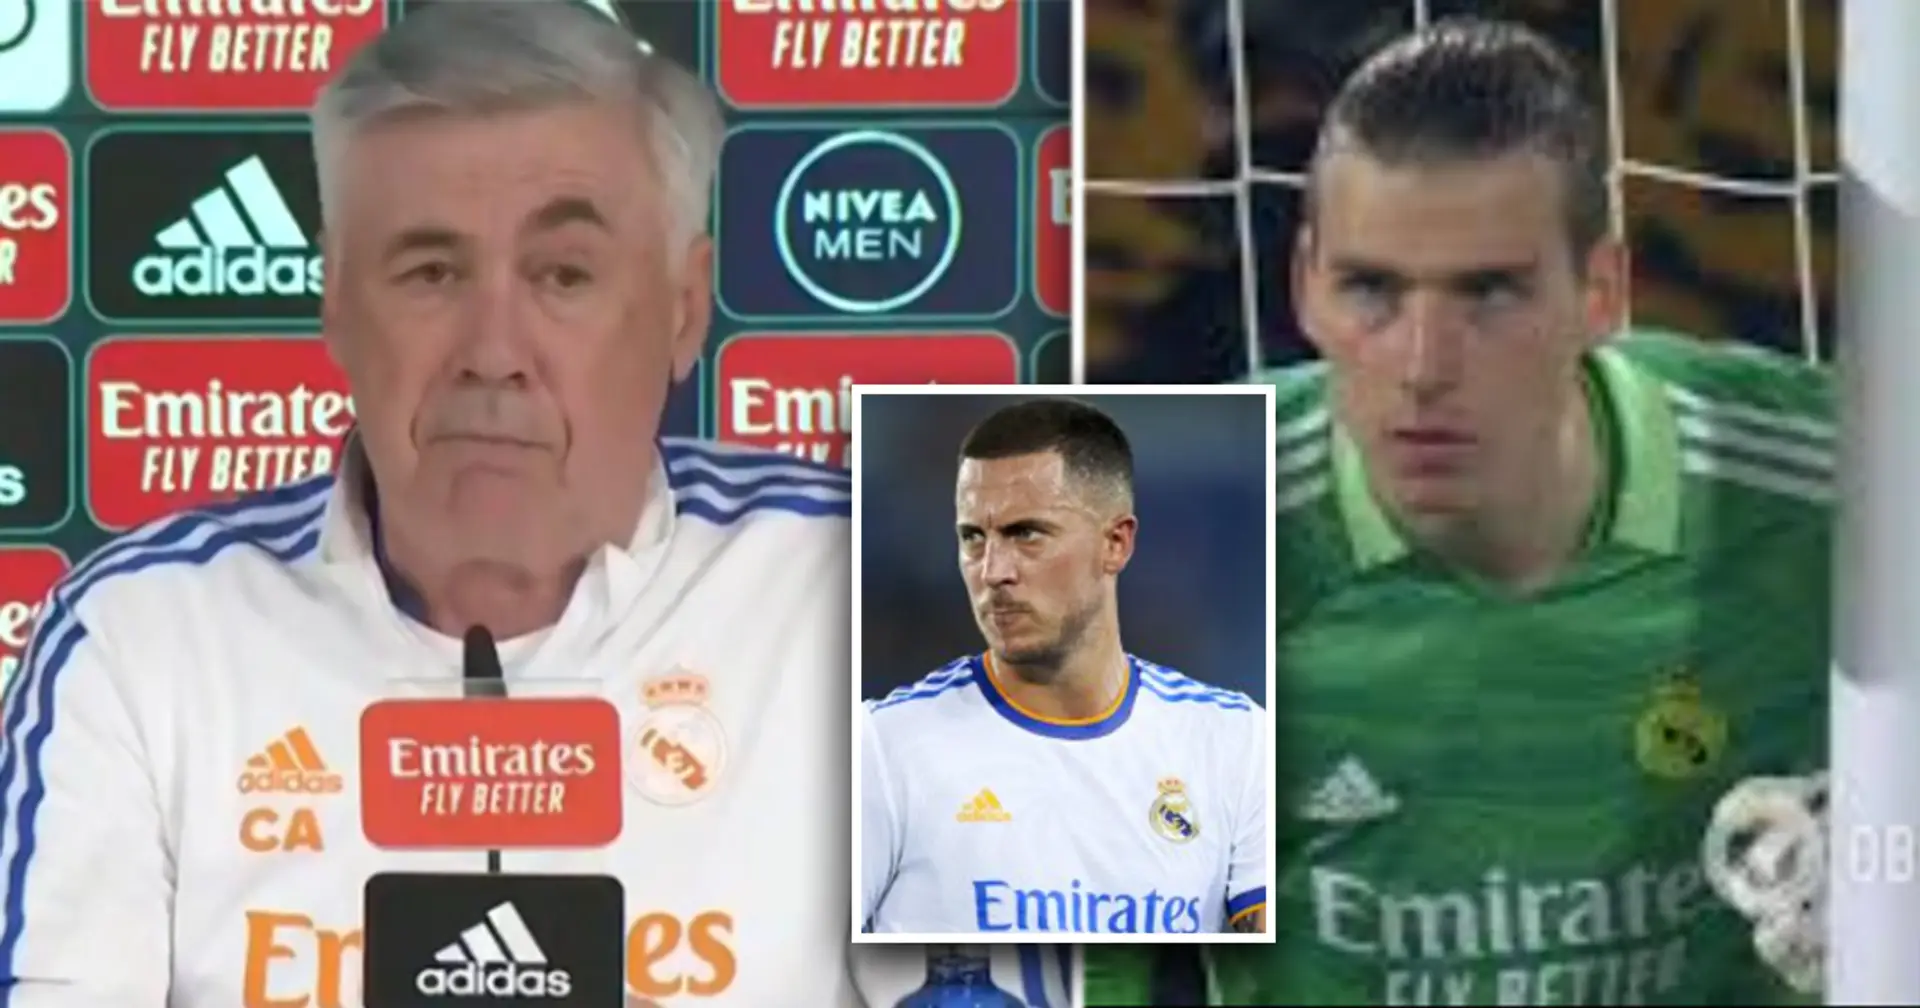 Ancelotti confirms Lunin will start v Atletico Madrid, provides update on Hazard and Bale